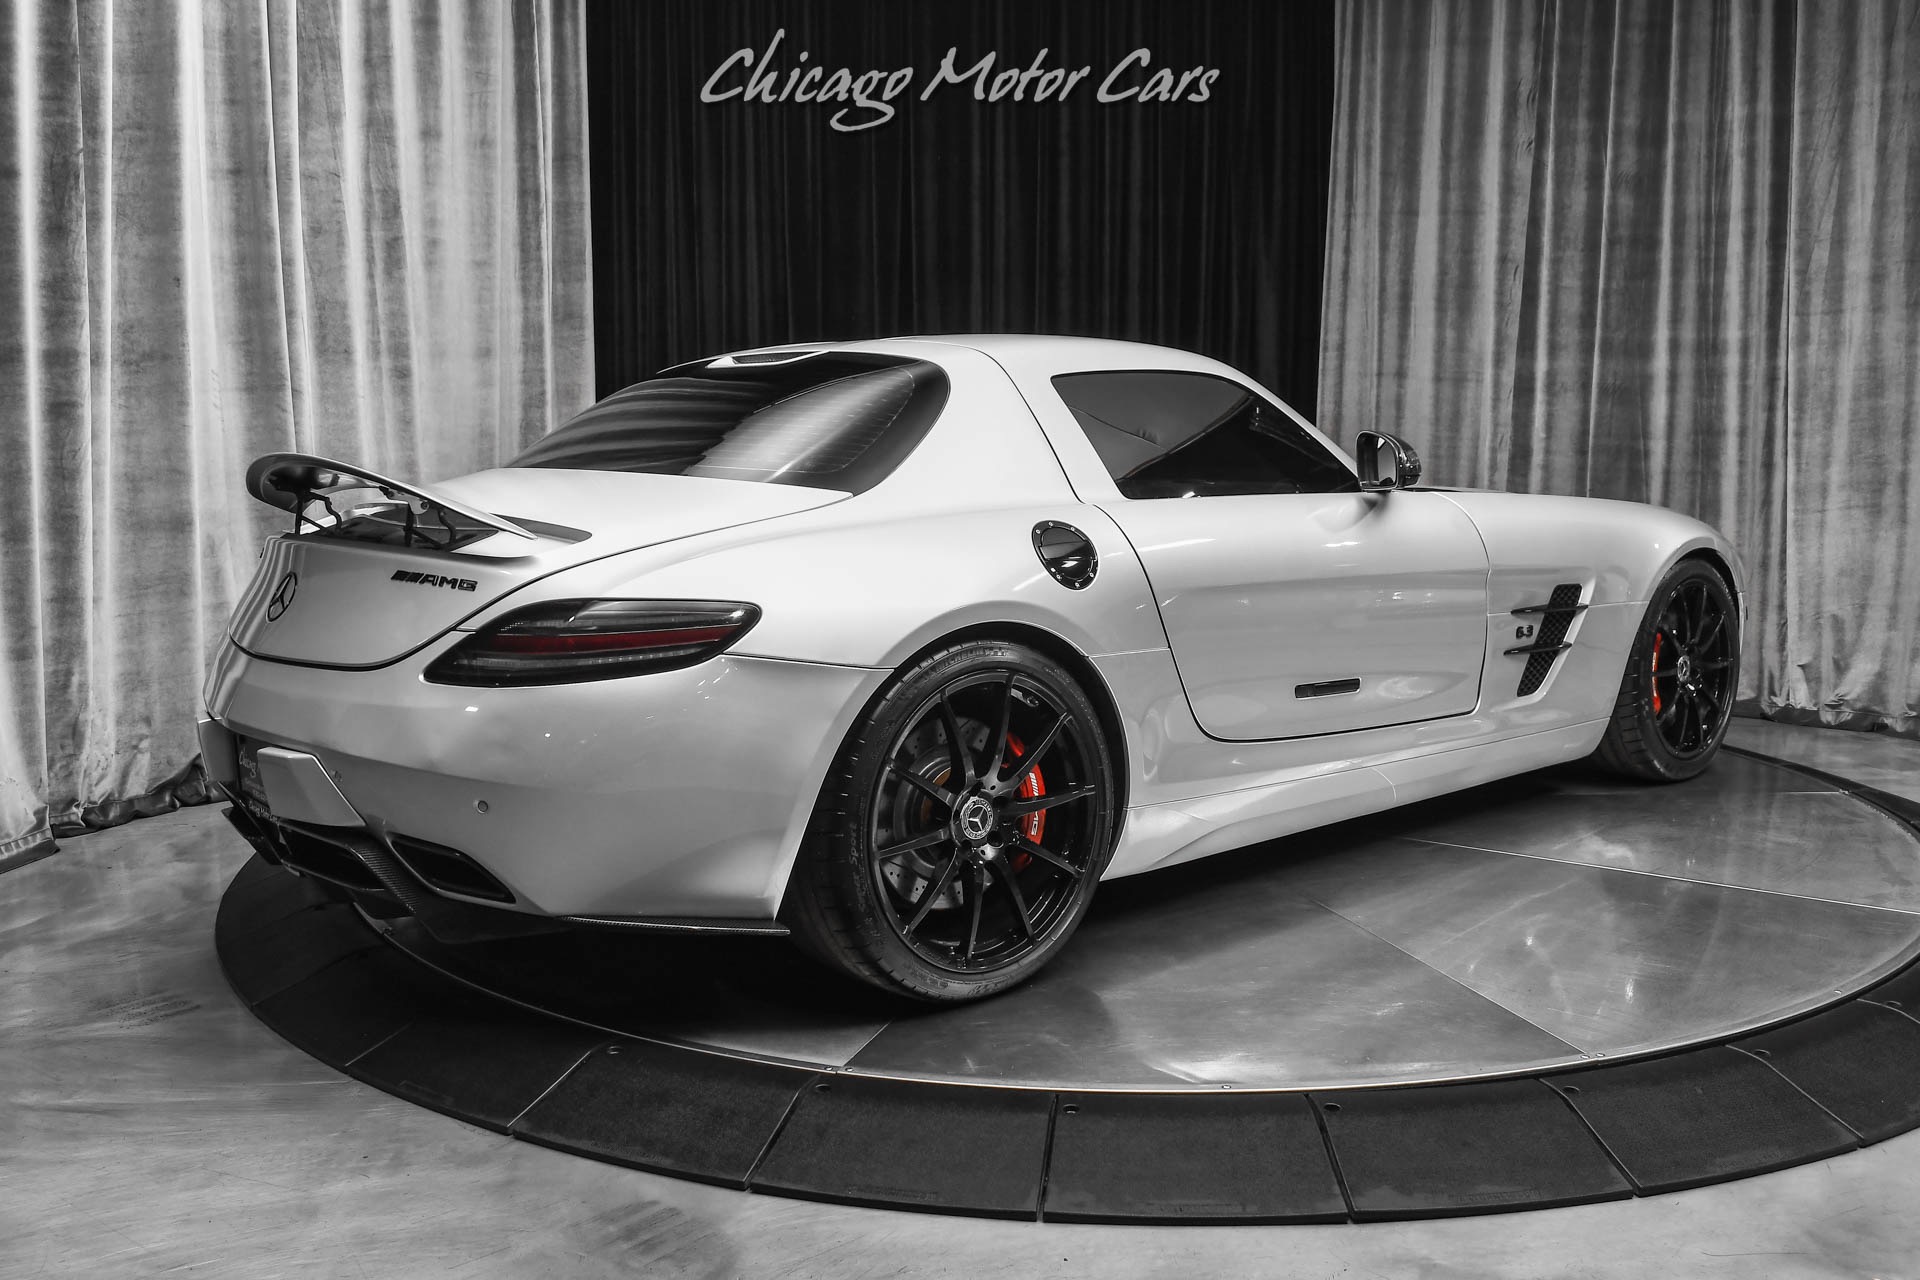 Used-2011-Mercedes-Benz-SLS-AMG-Gullwing-Coupe-RARE-HOT-Spec-TONS-of-Carbon-AMG-Suspension